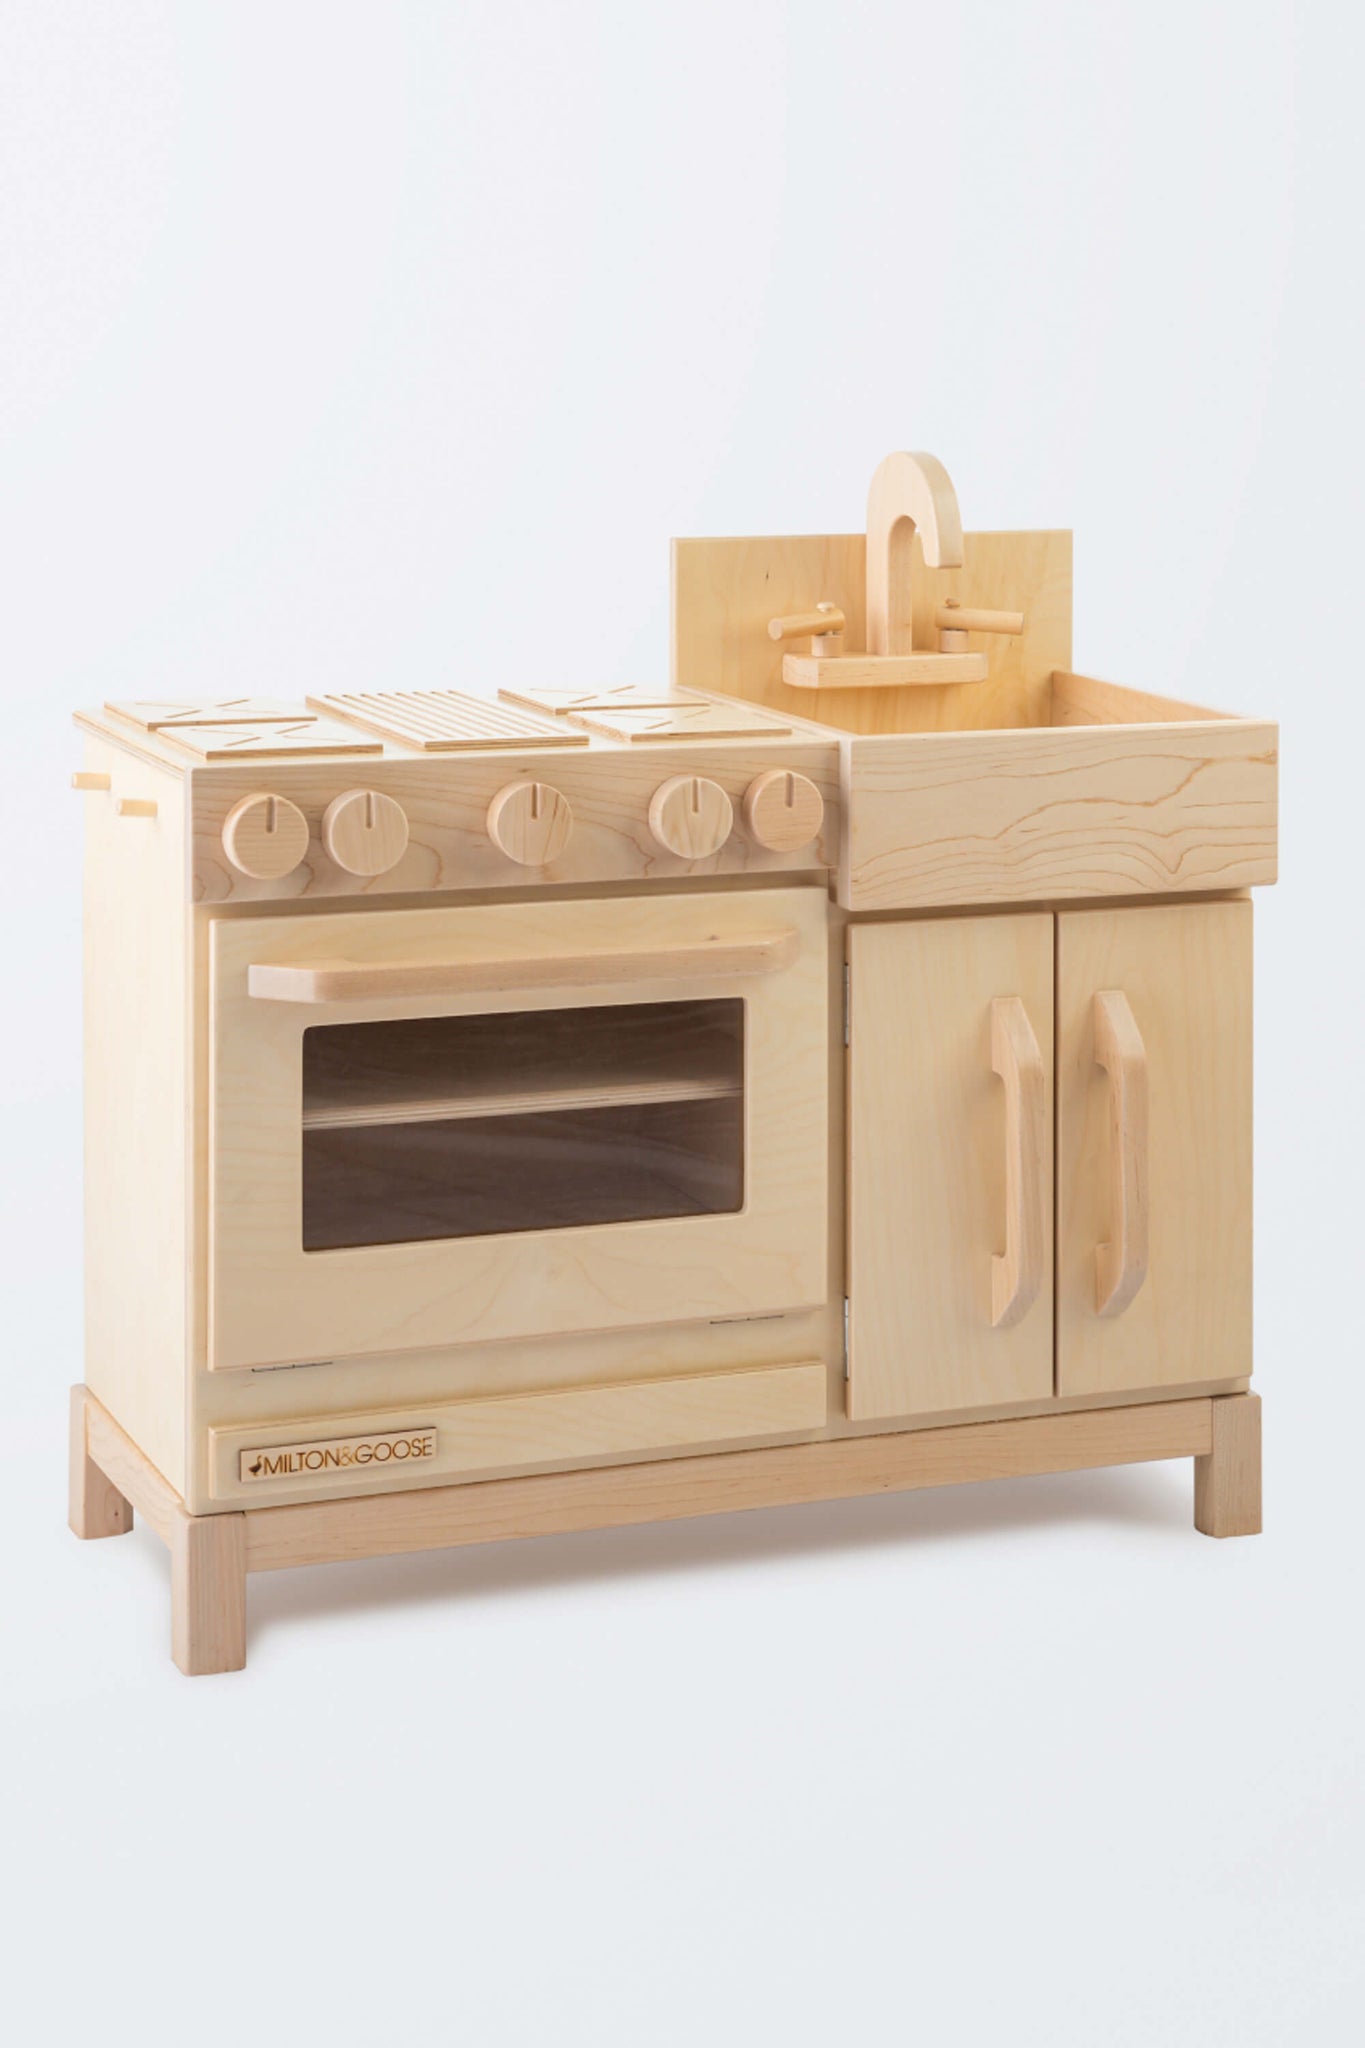 Milton & Goose Essential Play kitchen with a natural finish. The kitchen is turned so you can see the side. This wooden play kitchen is made with Baltic Birch Plywood and North American Maple wood.